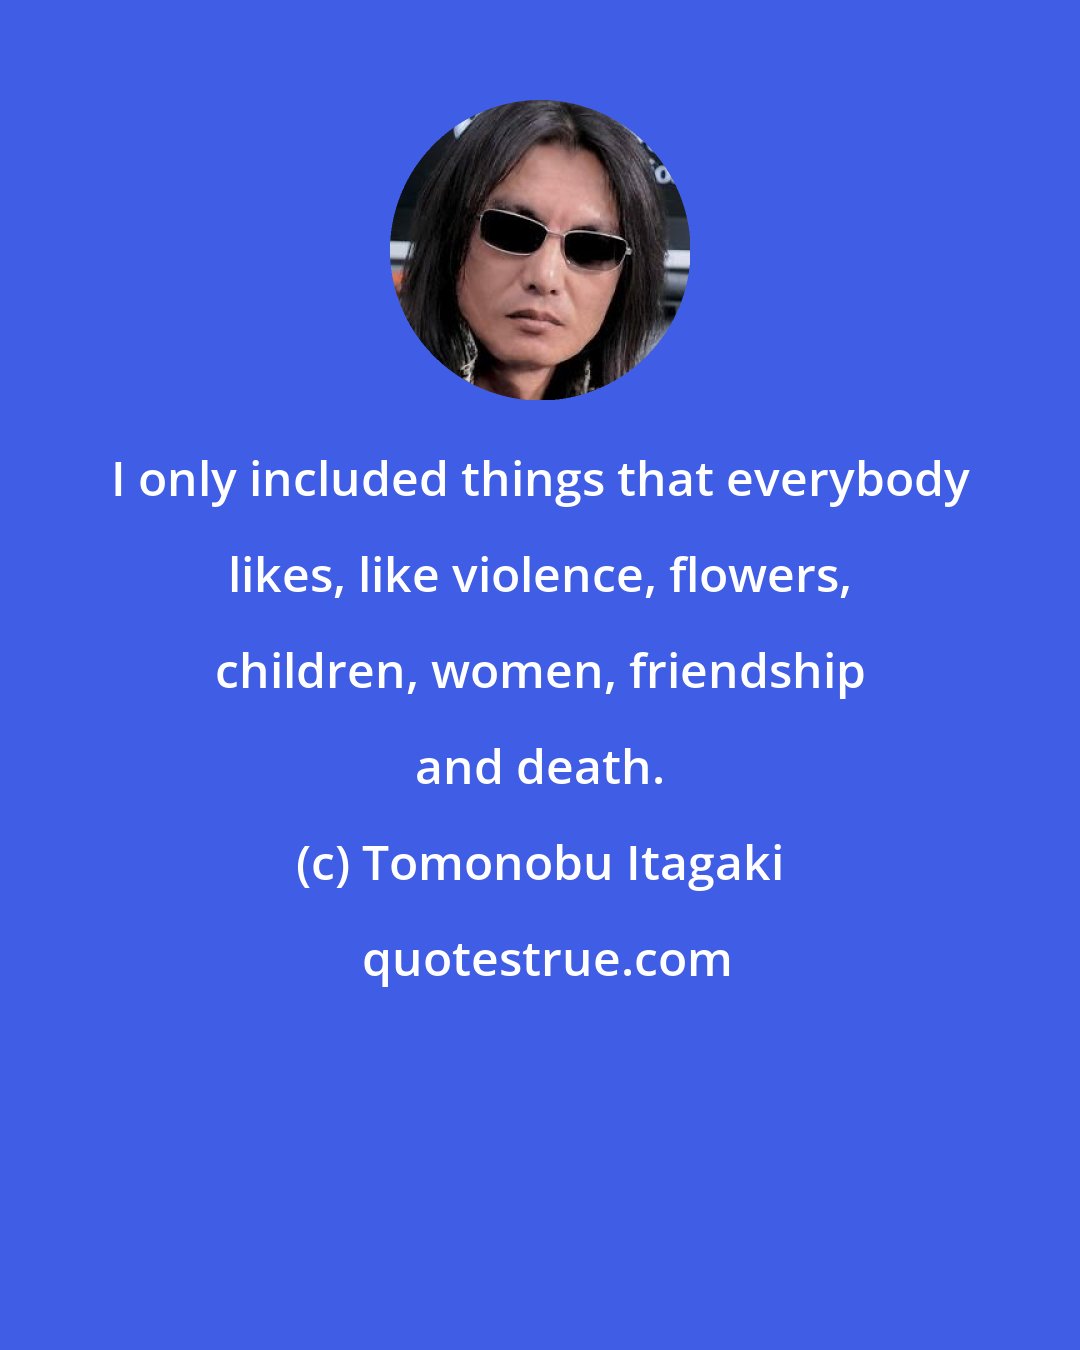 Tomonobu Itagaki: I only included things that everybody likes, like violence, flowers, children, women, friendship and death.